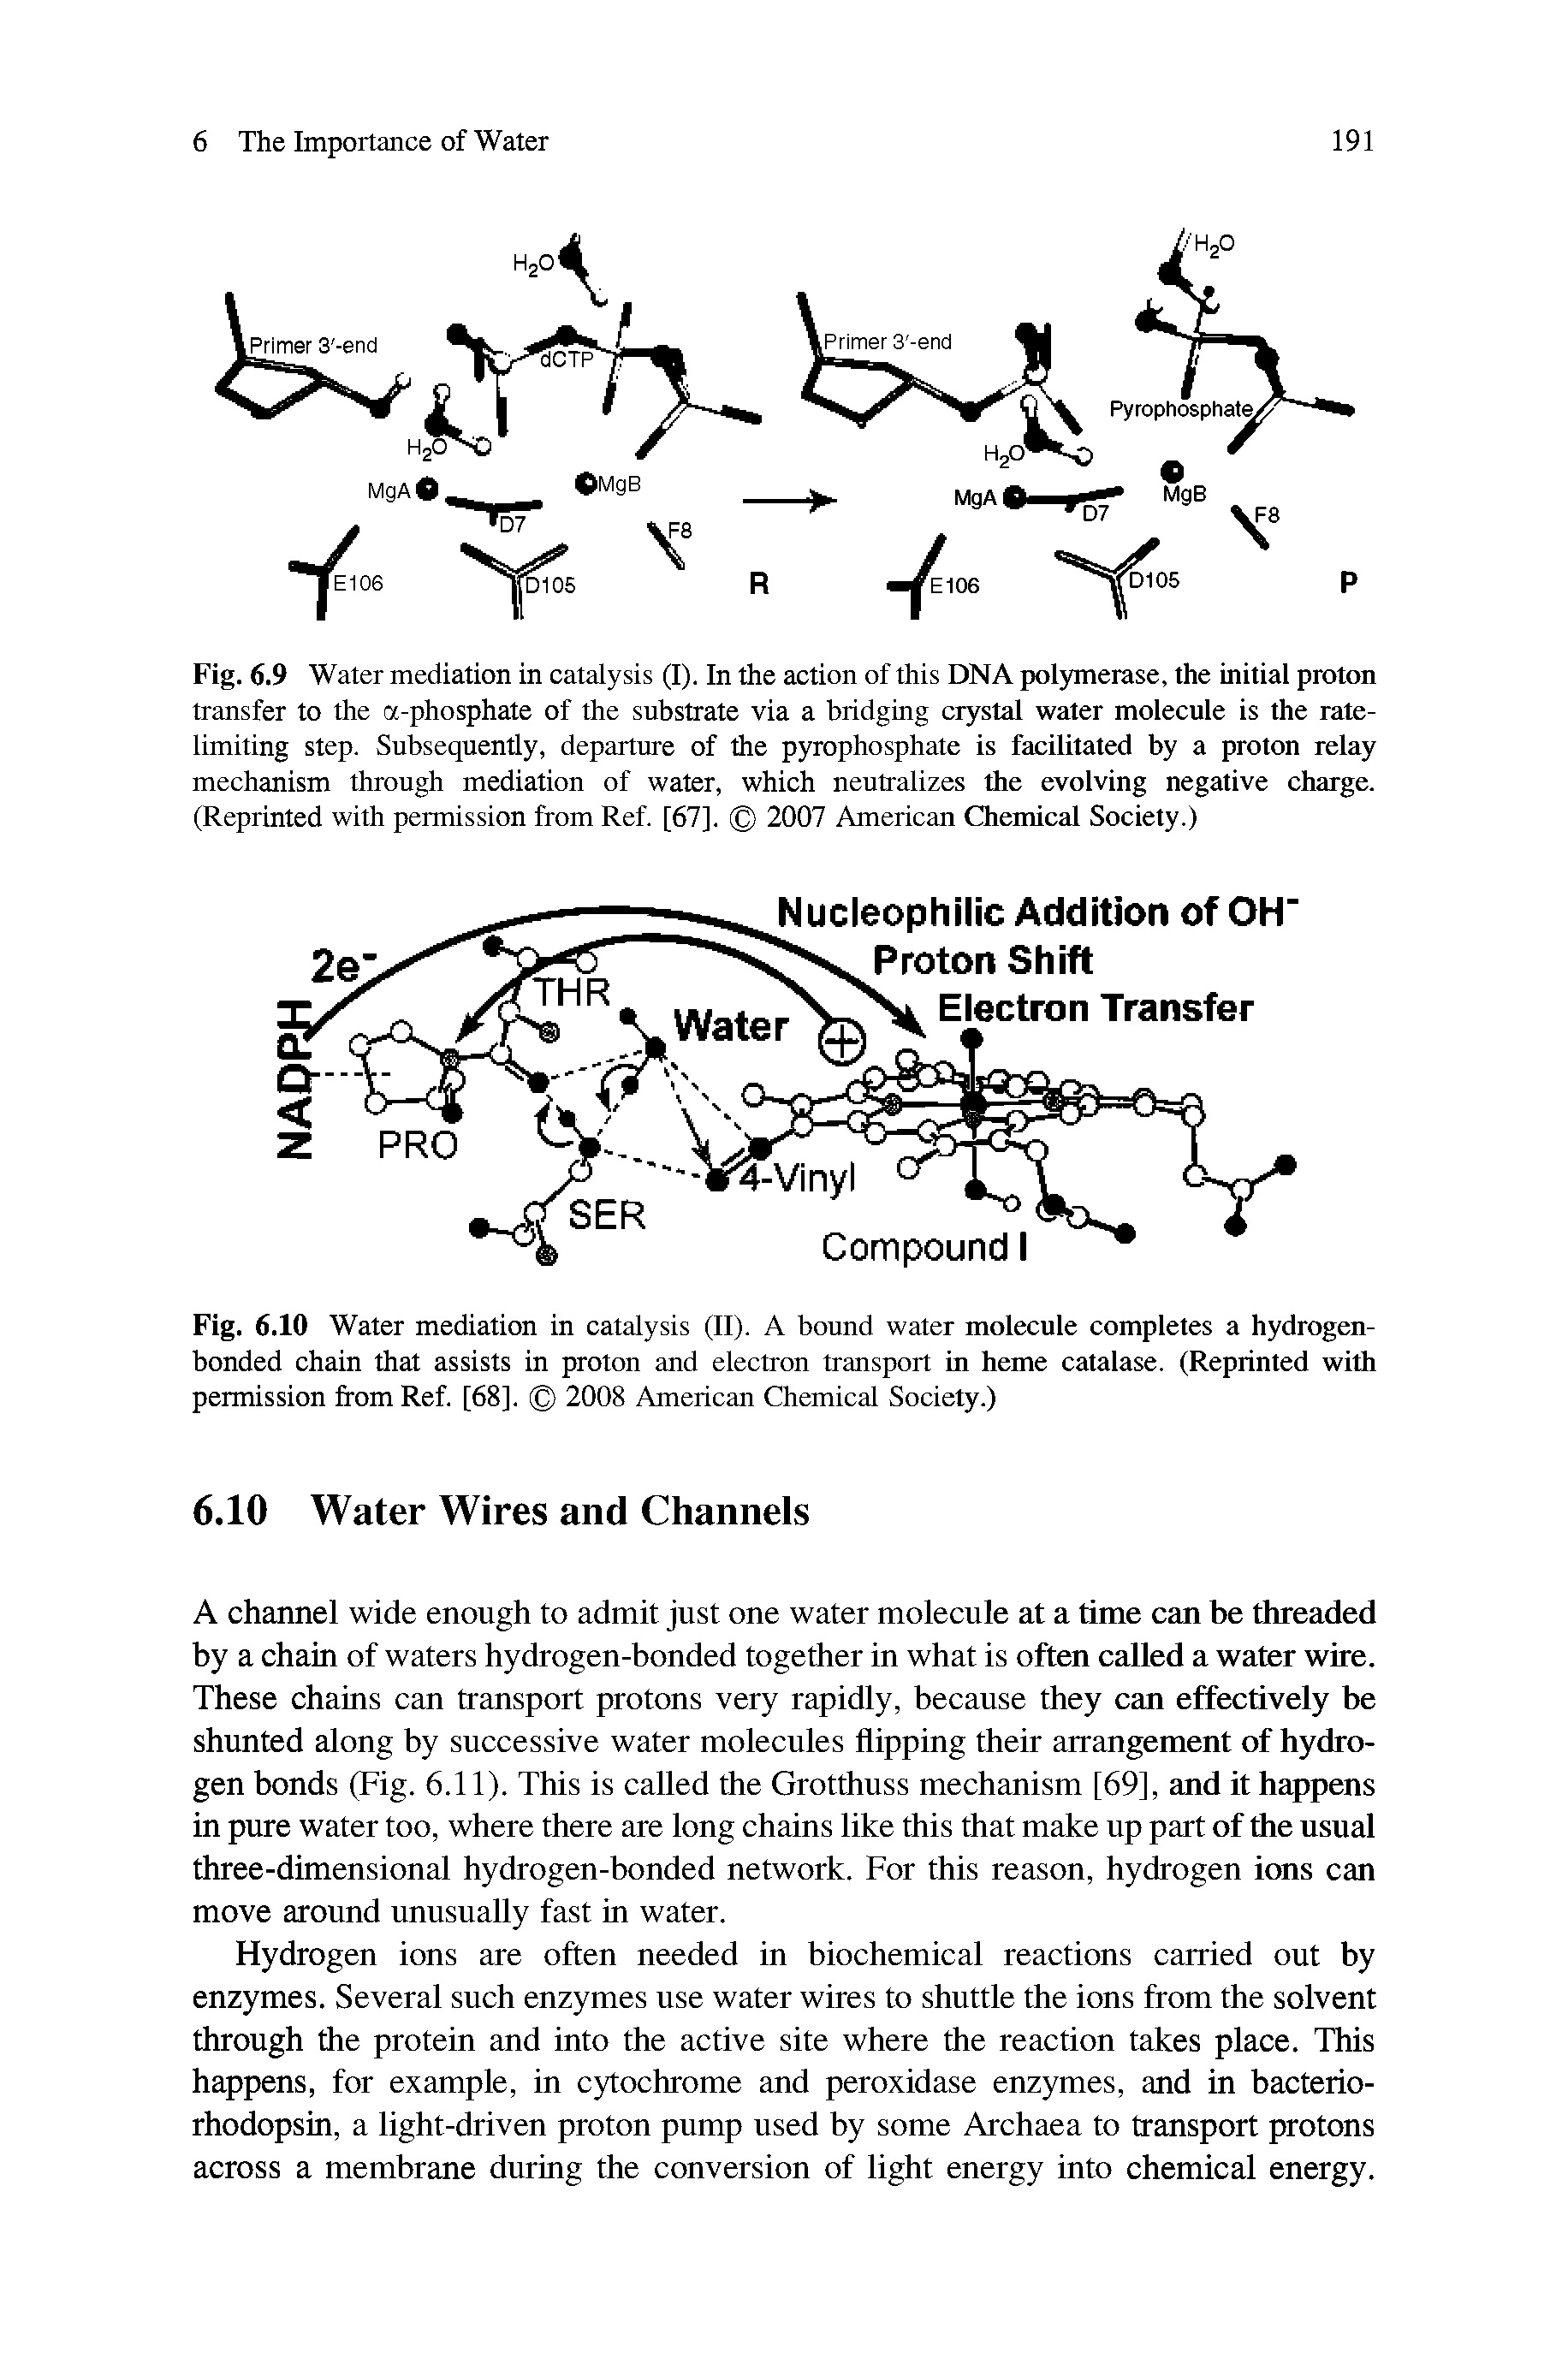 Fig. 6.9 Water mediation in catalysis (I). In the action of this DNA polymerase, the initial proton transfer to the a-phosphate of the substrate via a bridging crystal water molecule is the rate-limiting step. Subsequently, departure of the pyrophosphate is facilitated by a proton relay mechanism through mediation of water, which neutralizes the evolving negative charge. (Reprinted with permission from Ref. [67], 2007 American Chemical Society.)...